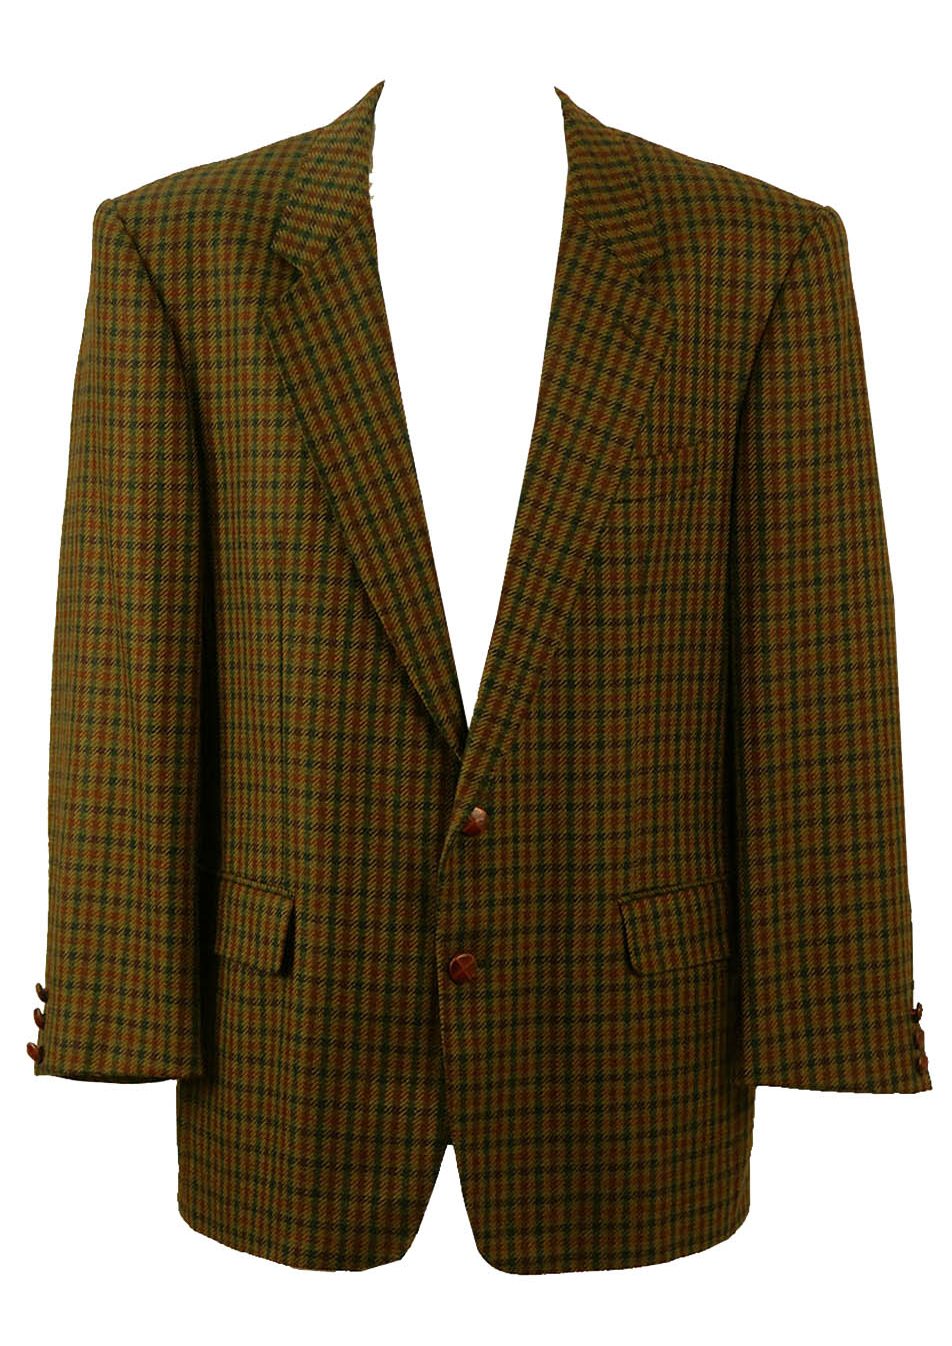 Green and Brown Check Tweed Jacket - XL/XXL | Reign Vintage